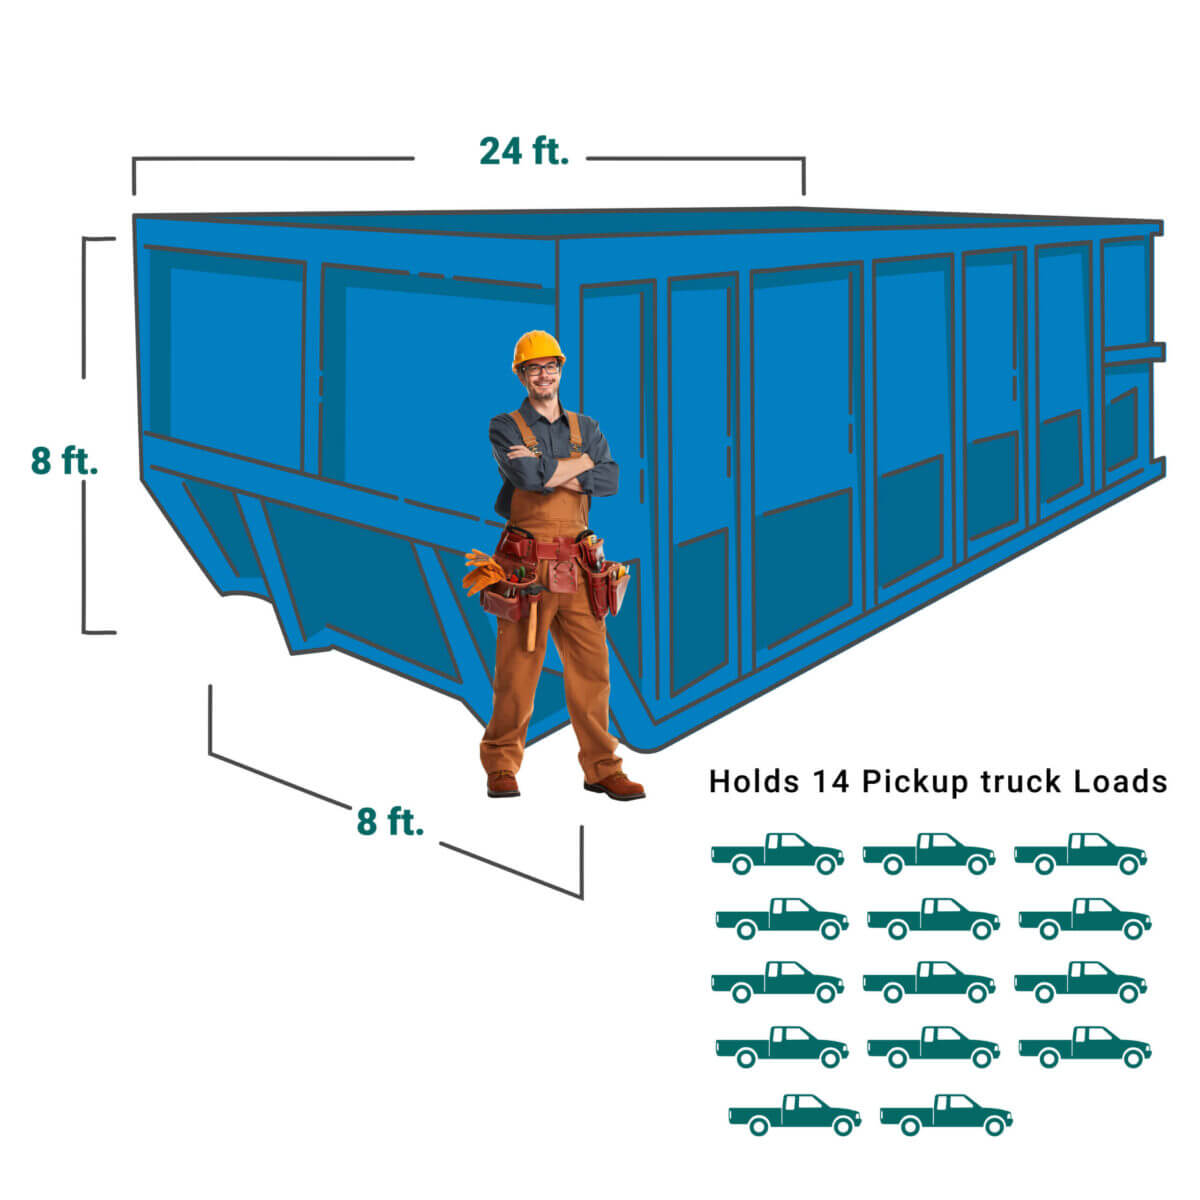 Image of a construction worker standing in front of a 40 yard dumpster. Dumpster is blue showing the dimensions of